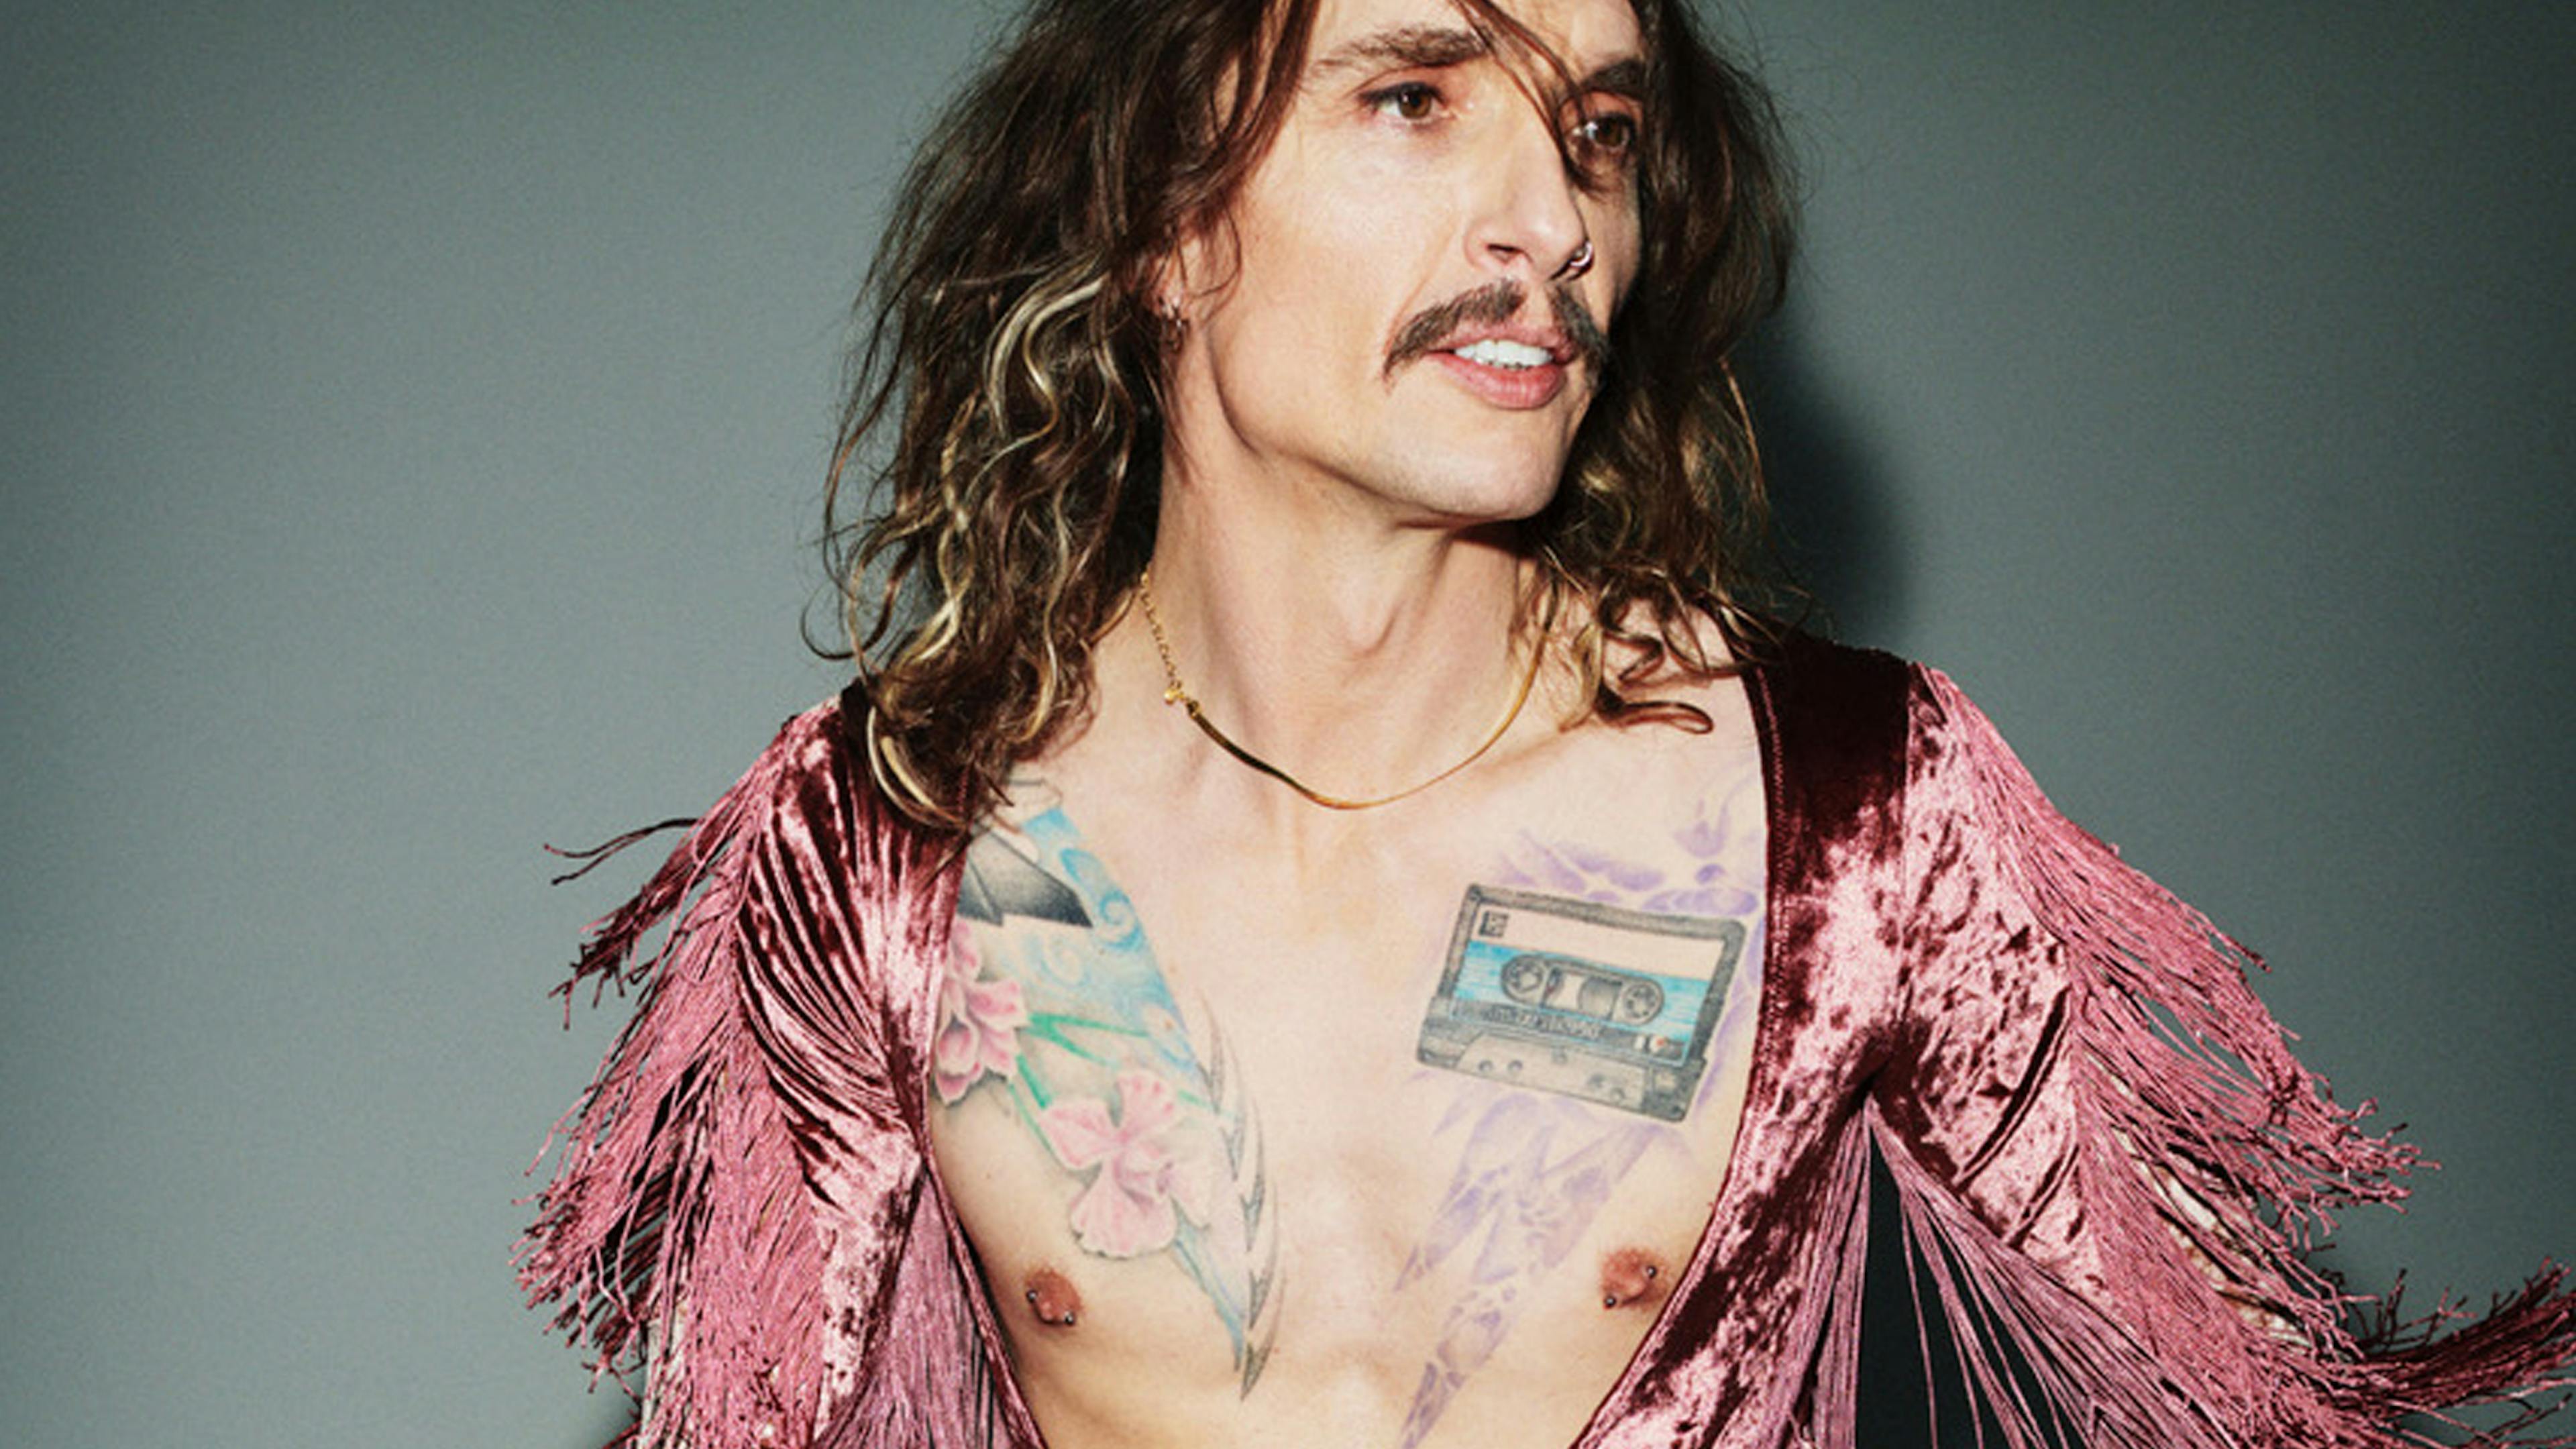 The Darkness’ Justin Hawkins: My life in 10 songs